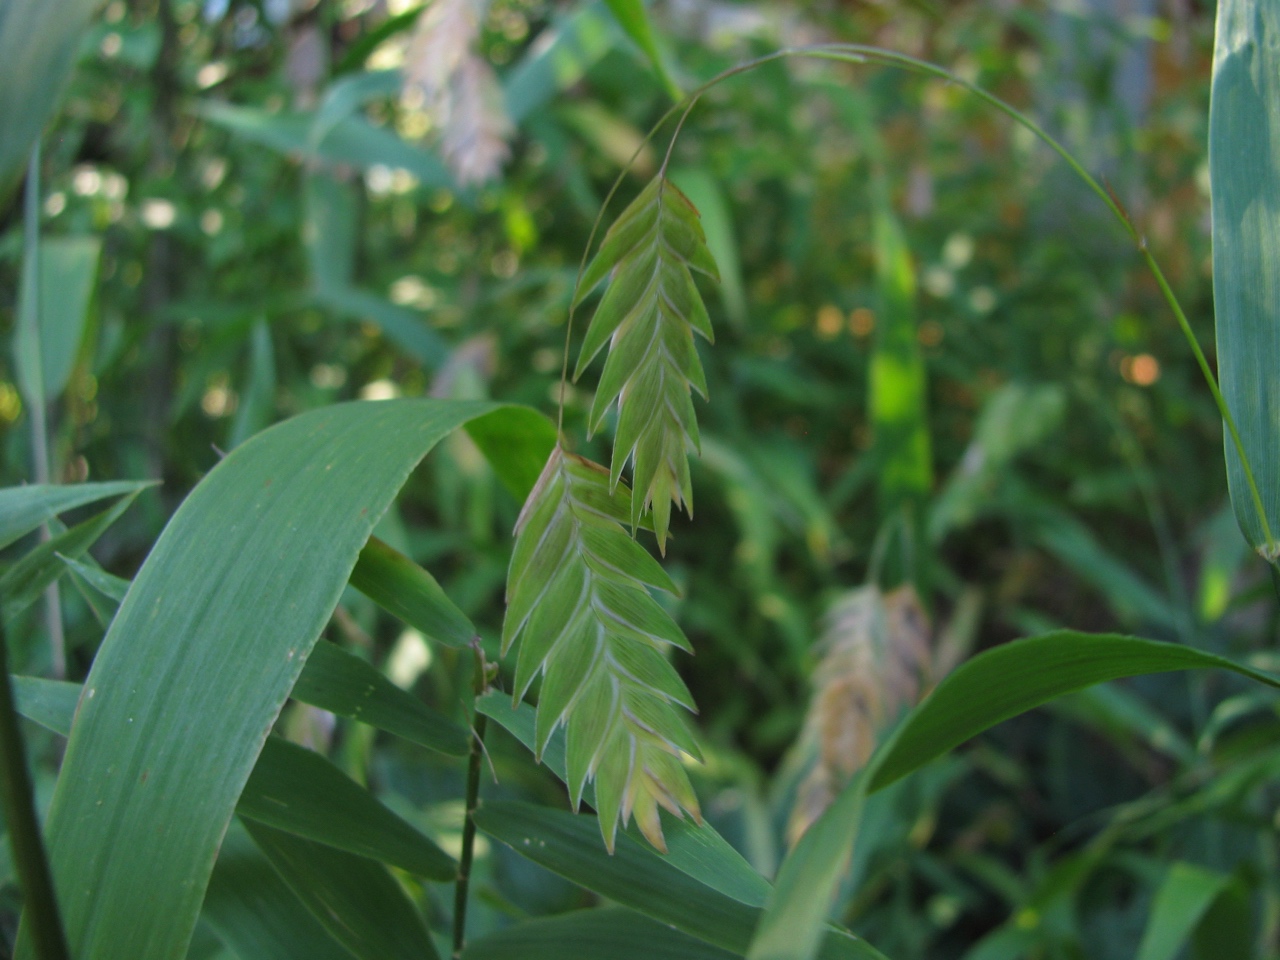 The Scientific Name is Chasmanthium latifolium [= Uniola latifolia]. You will likely hear them called River Oats, Fish-on-a-pole. This picture shows the Green spikelets in Summer of Chasmanthium latifolium [= Uniola latifolia]